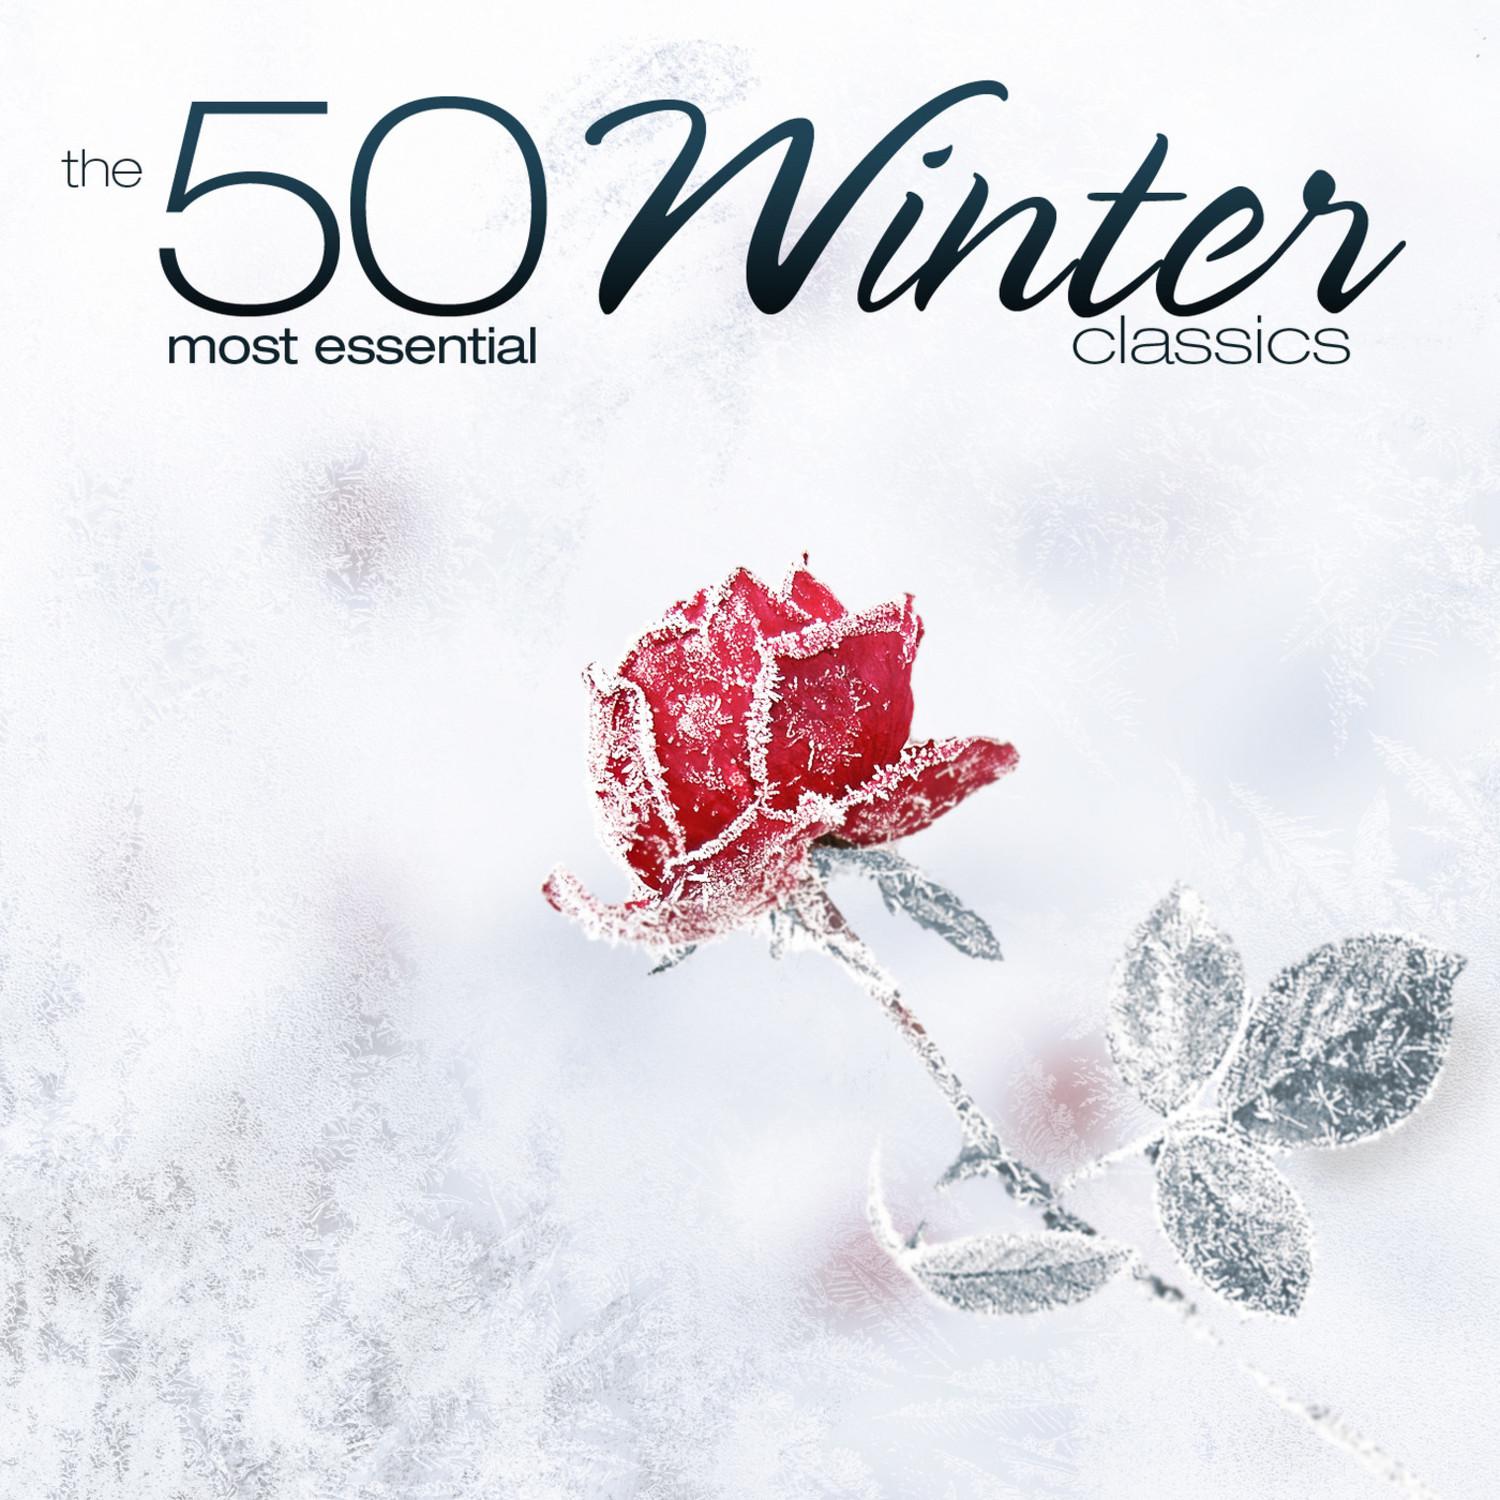 The 50 Most Essential Winter Classics